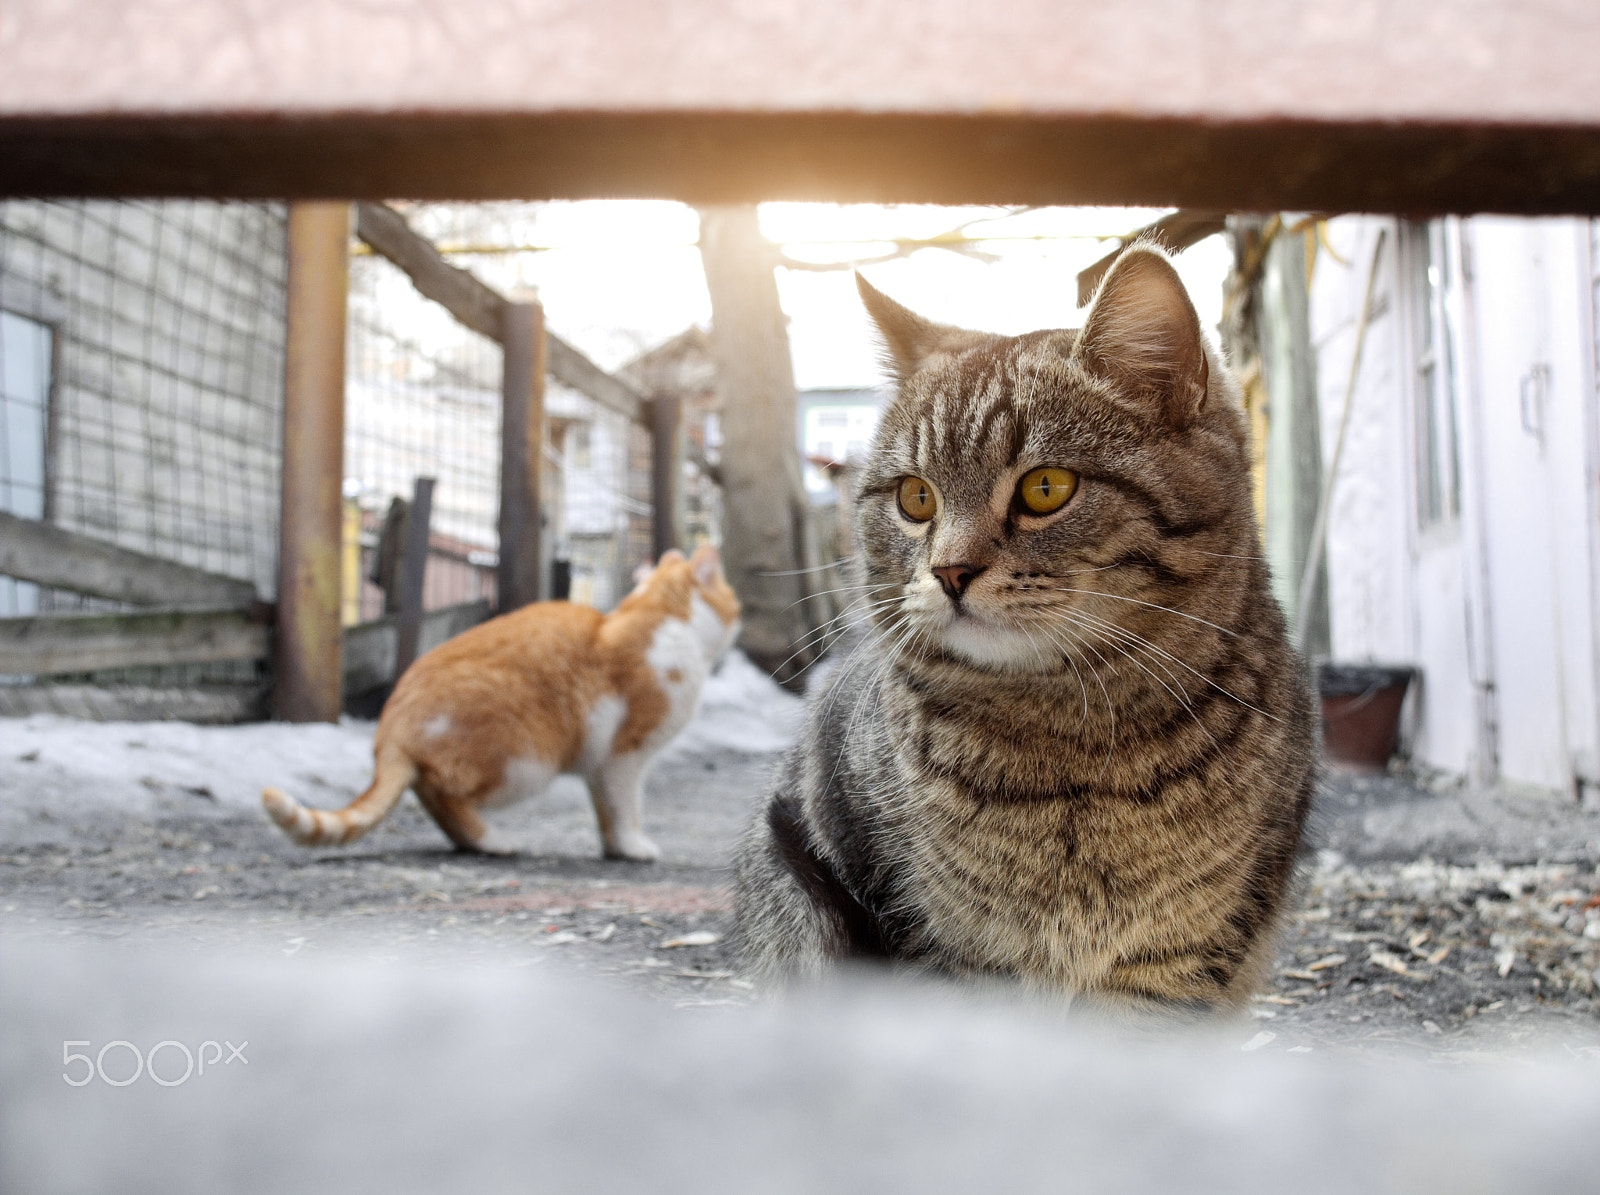 Built-in lens sample photo. Street cats photography